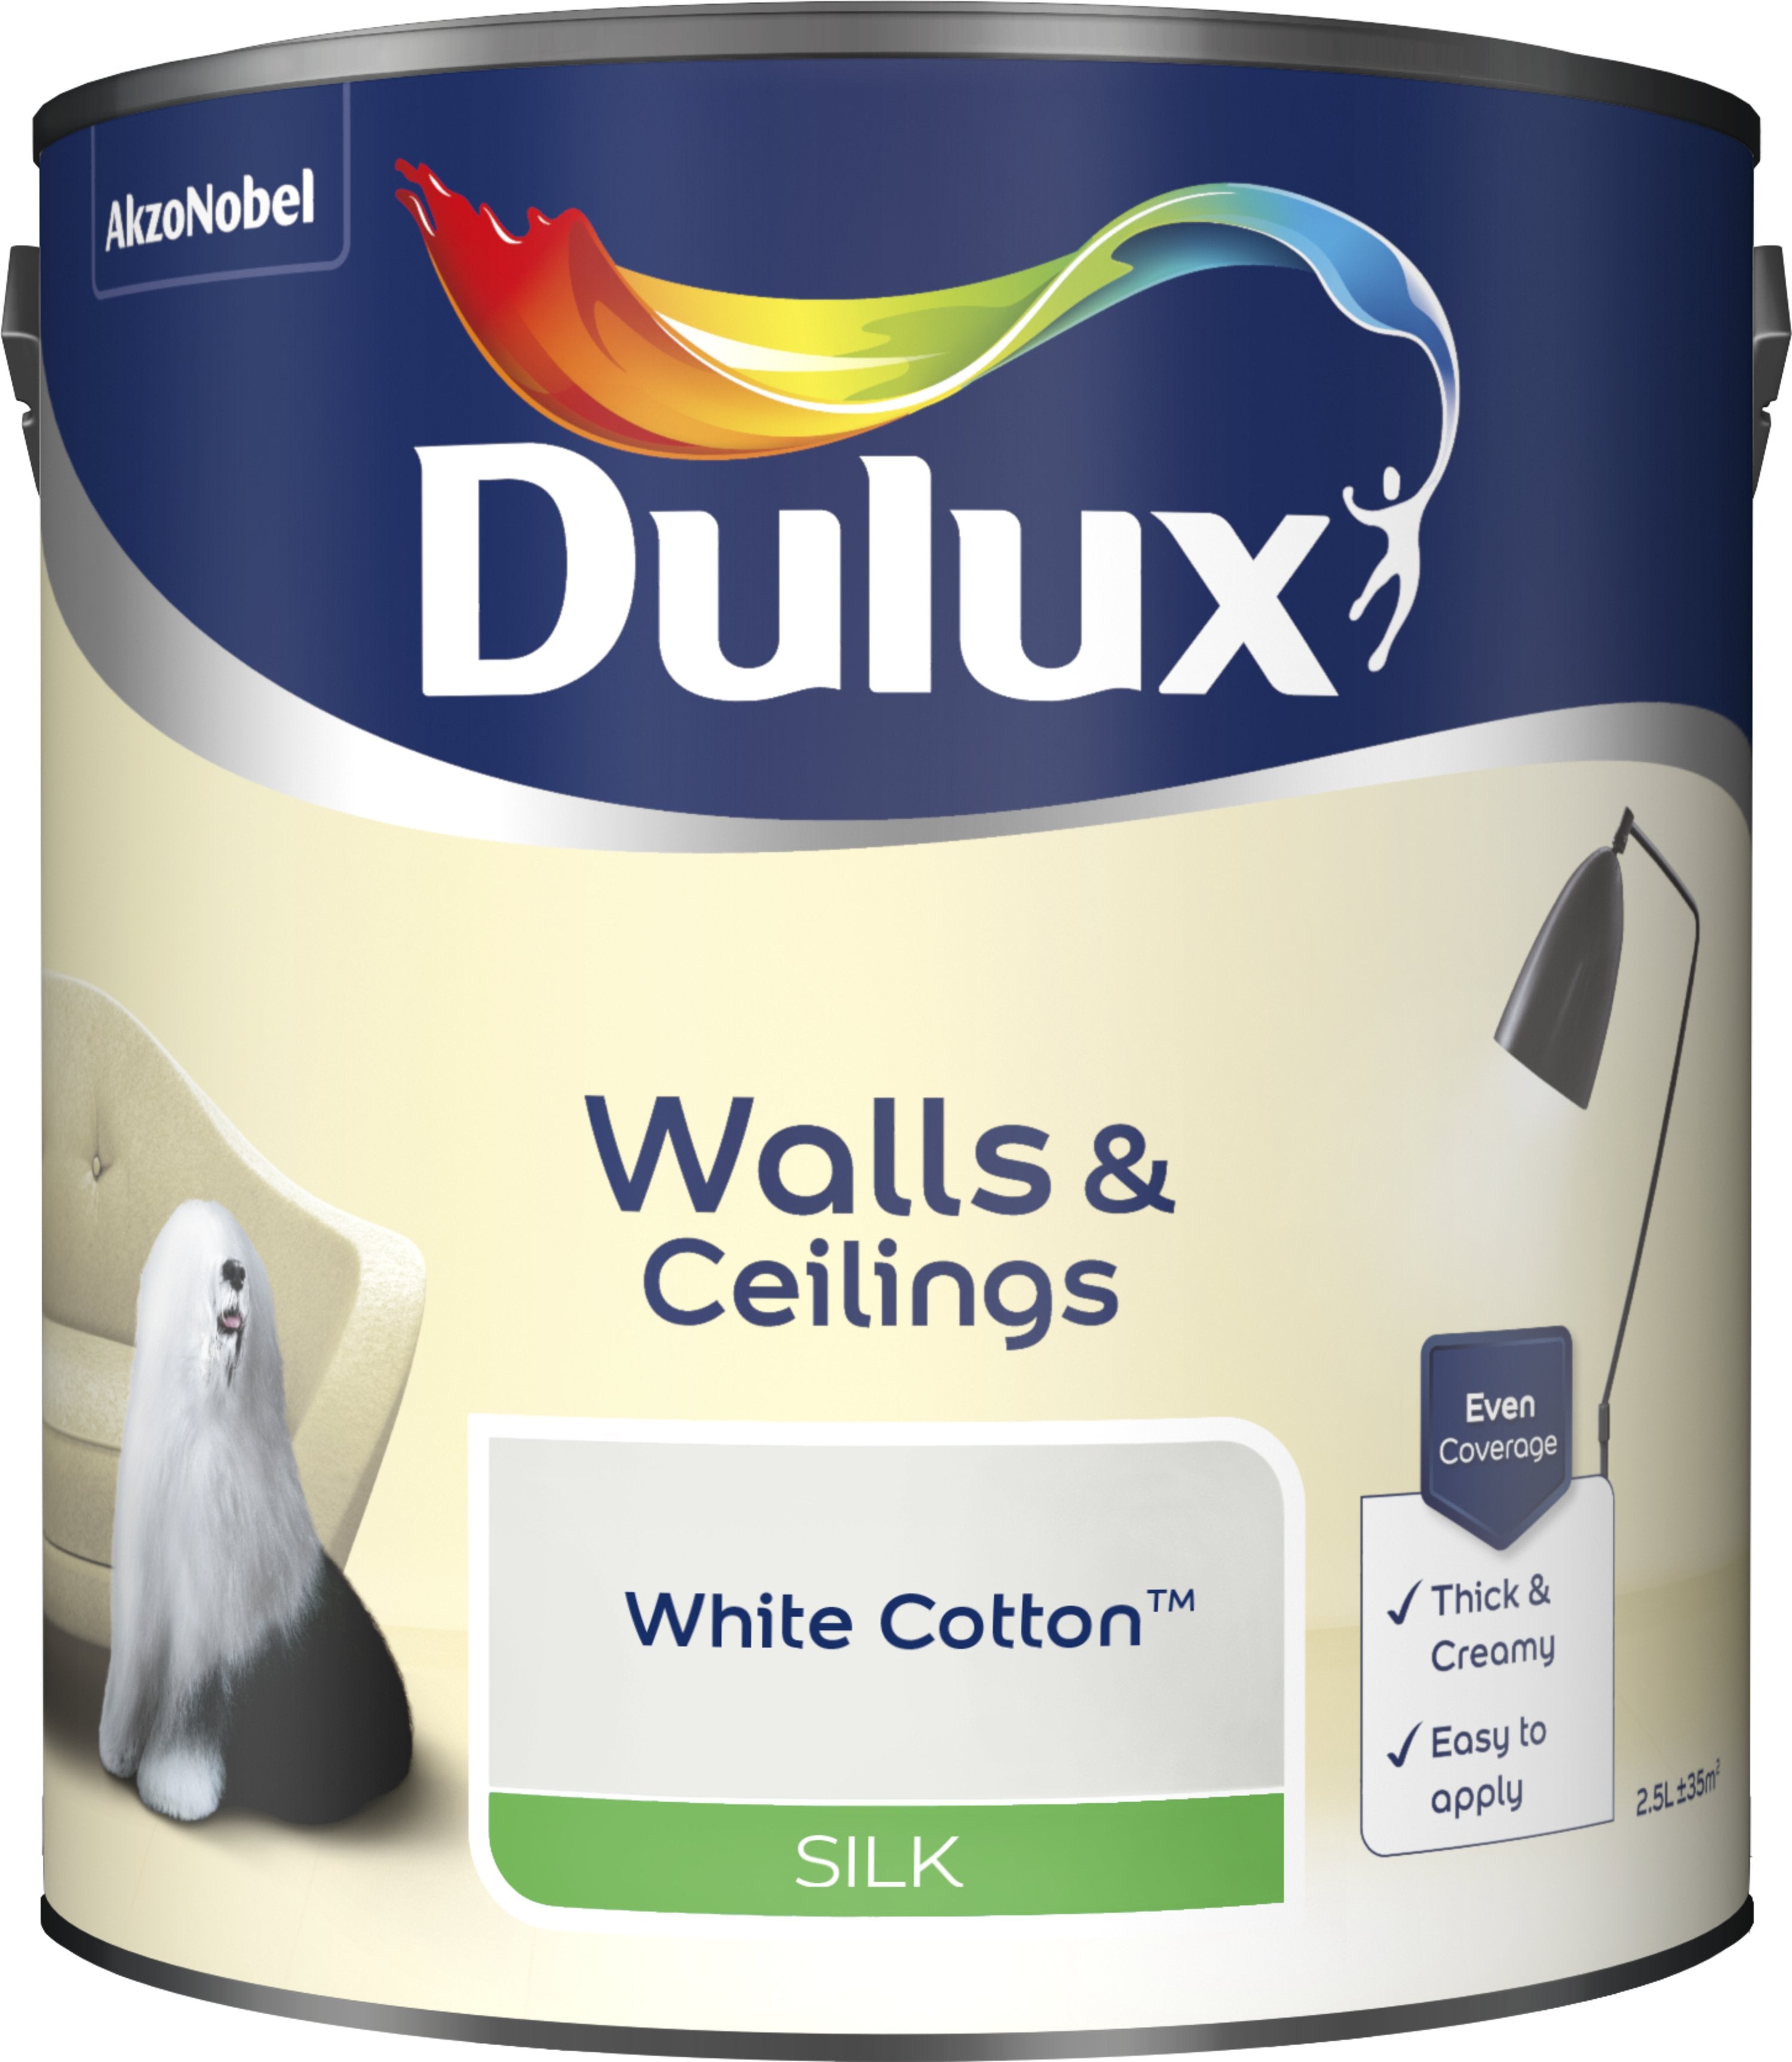 Dulux Silk Emulsion Paint For Walls And Ceilings - White Cotton 2.5L Garden & Diy Home Improvements